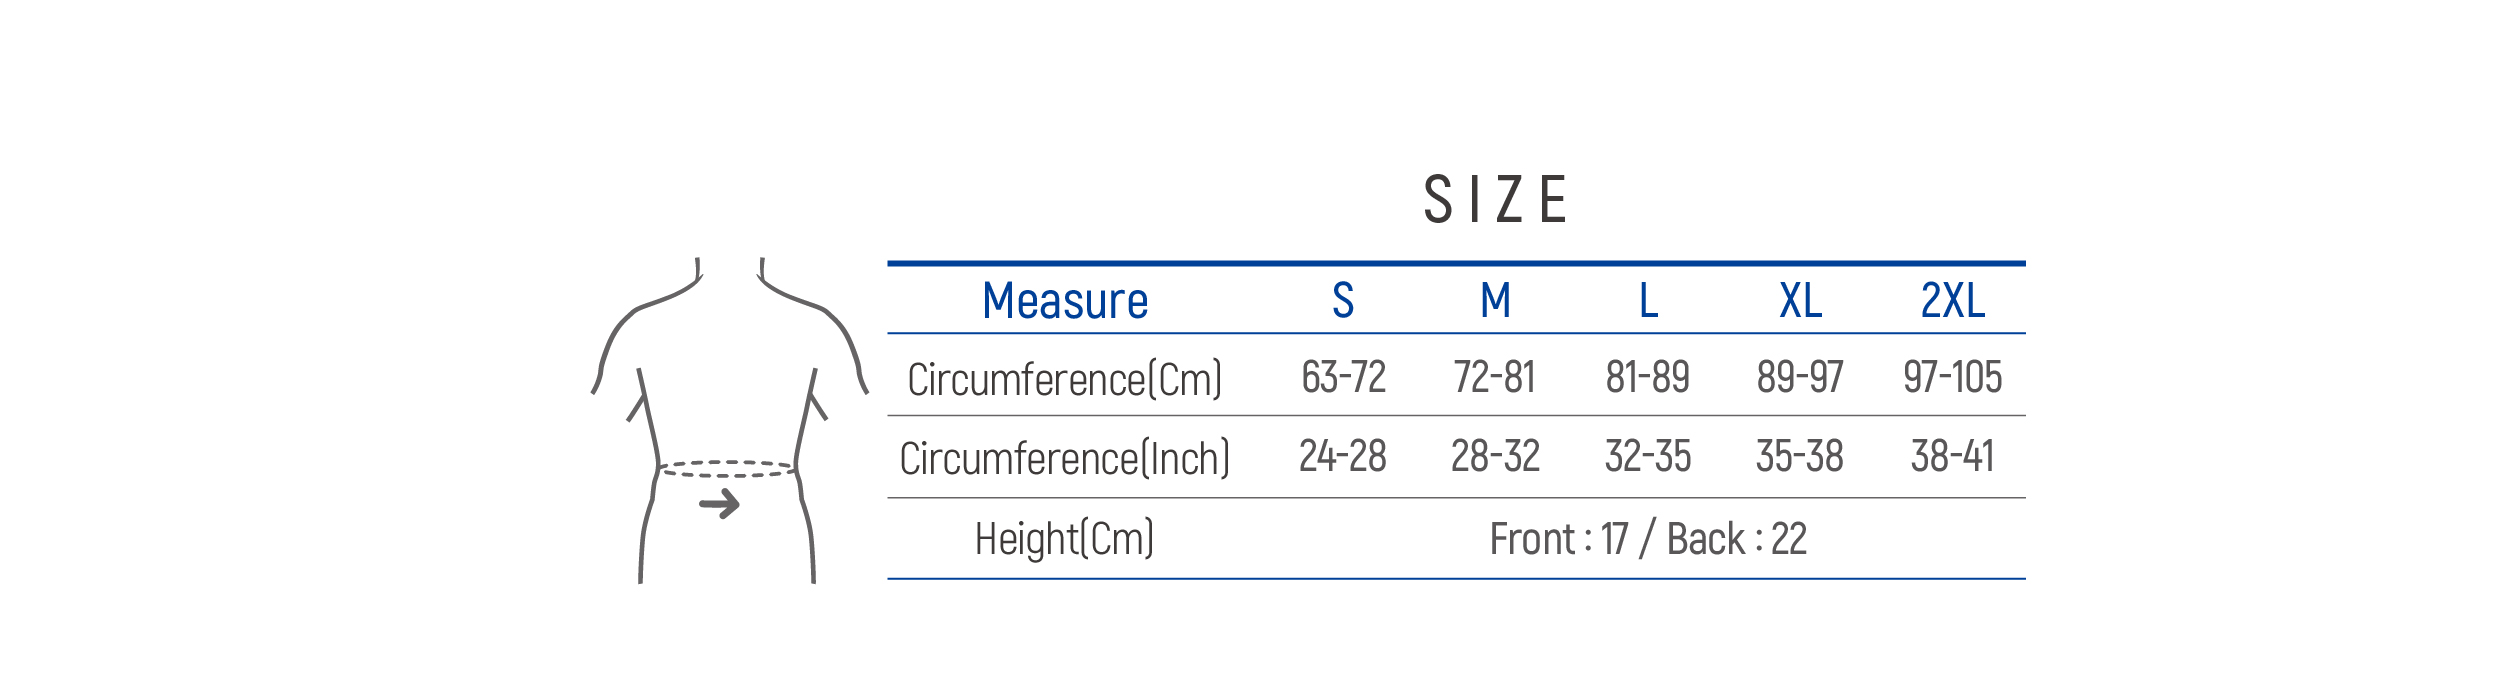 DR-B623 Size table image